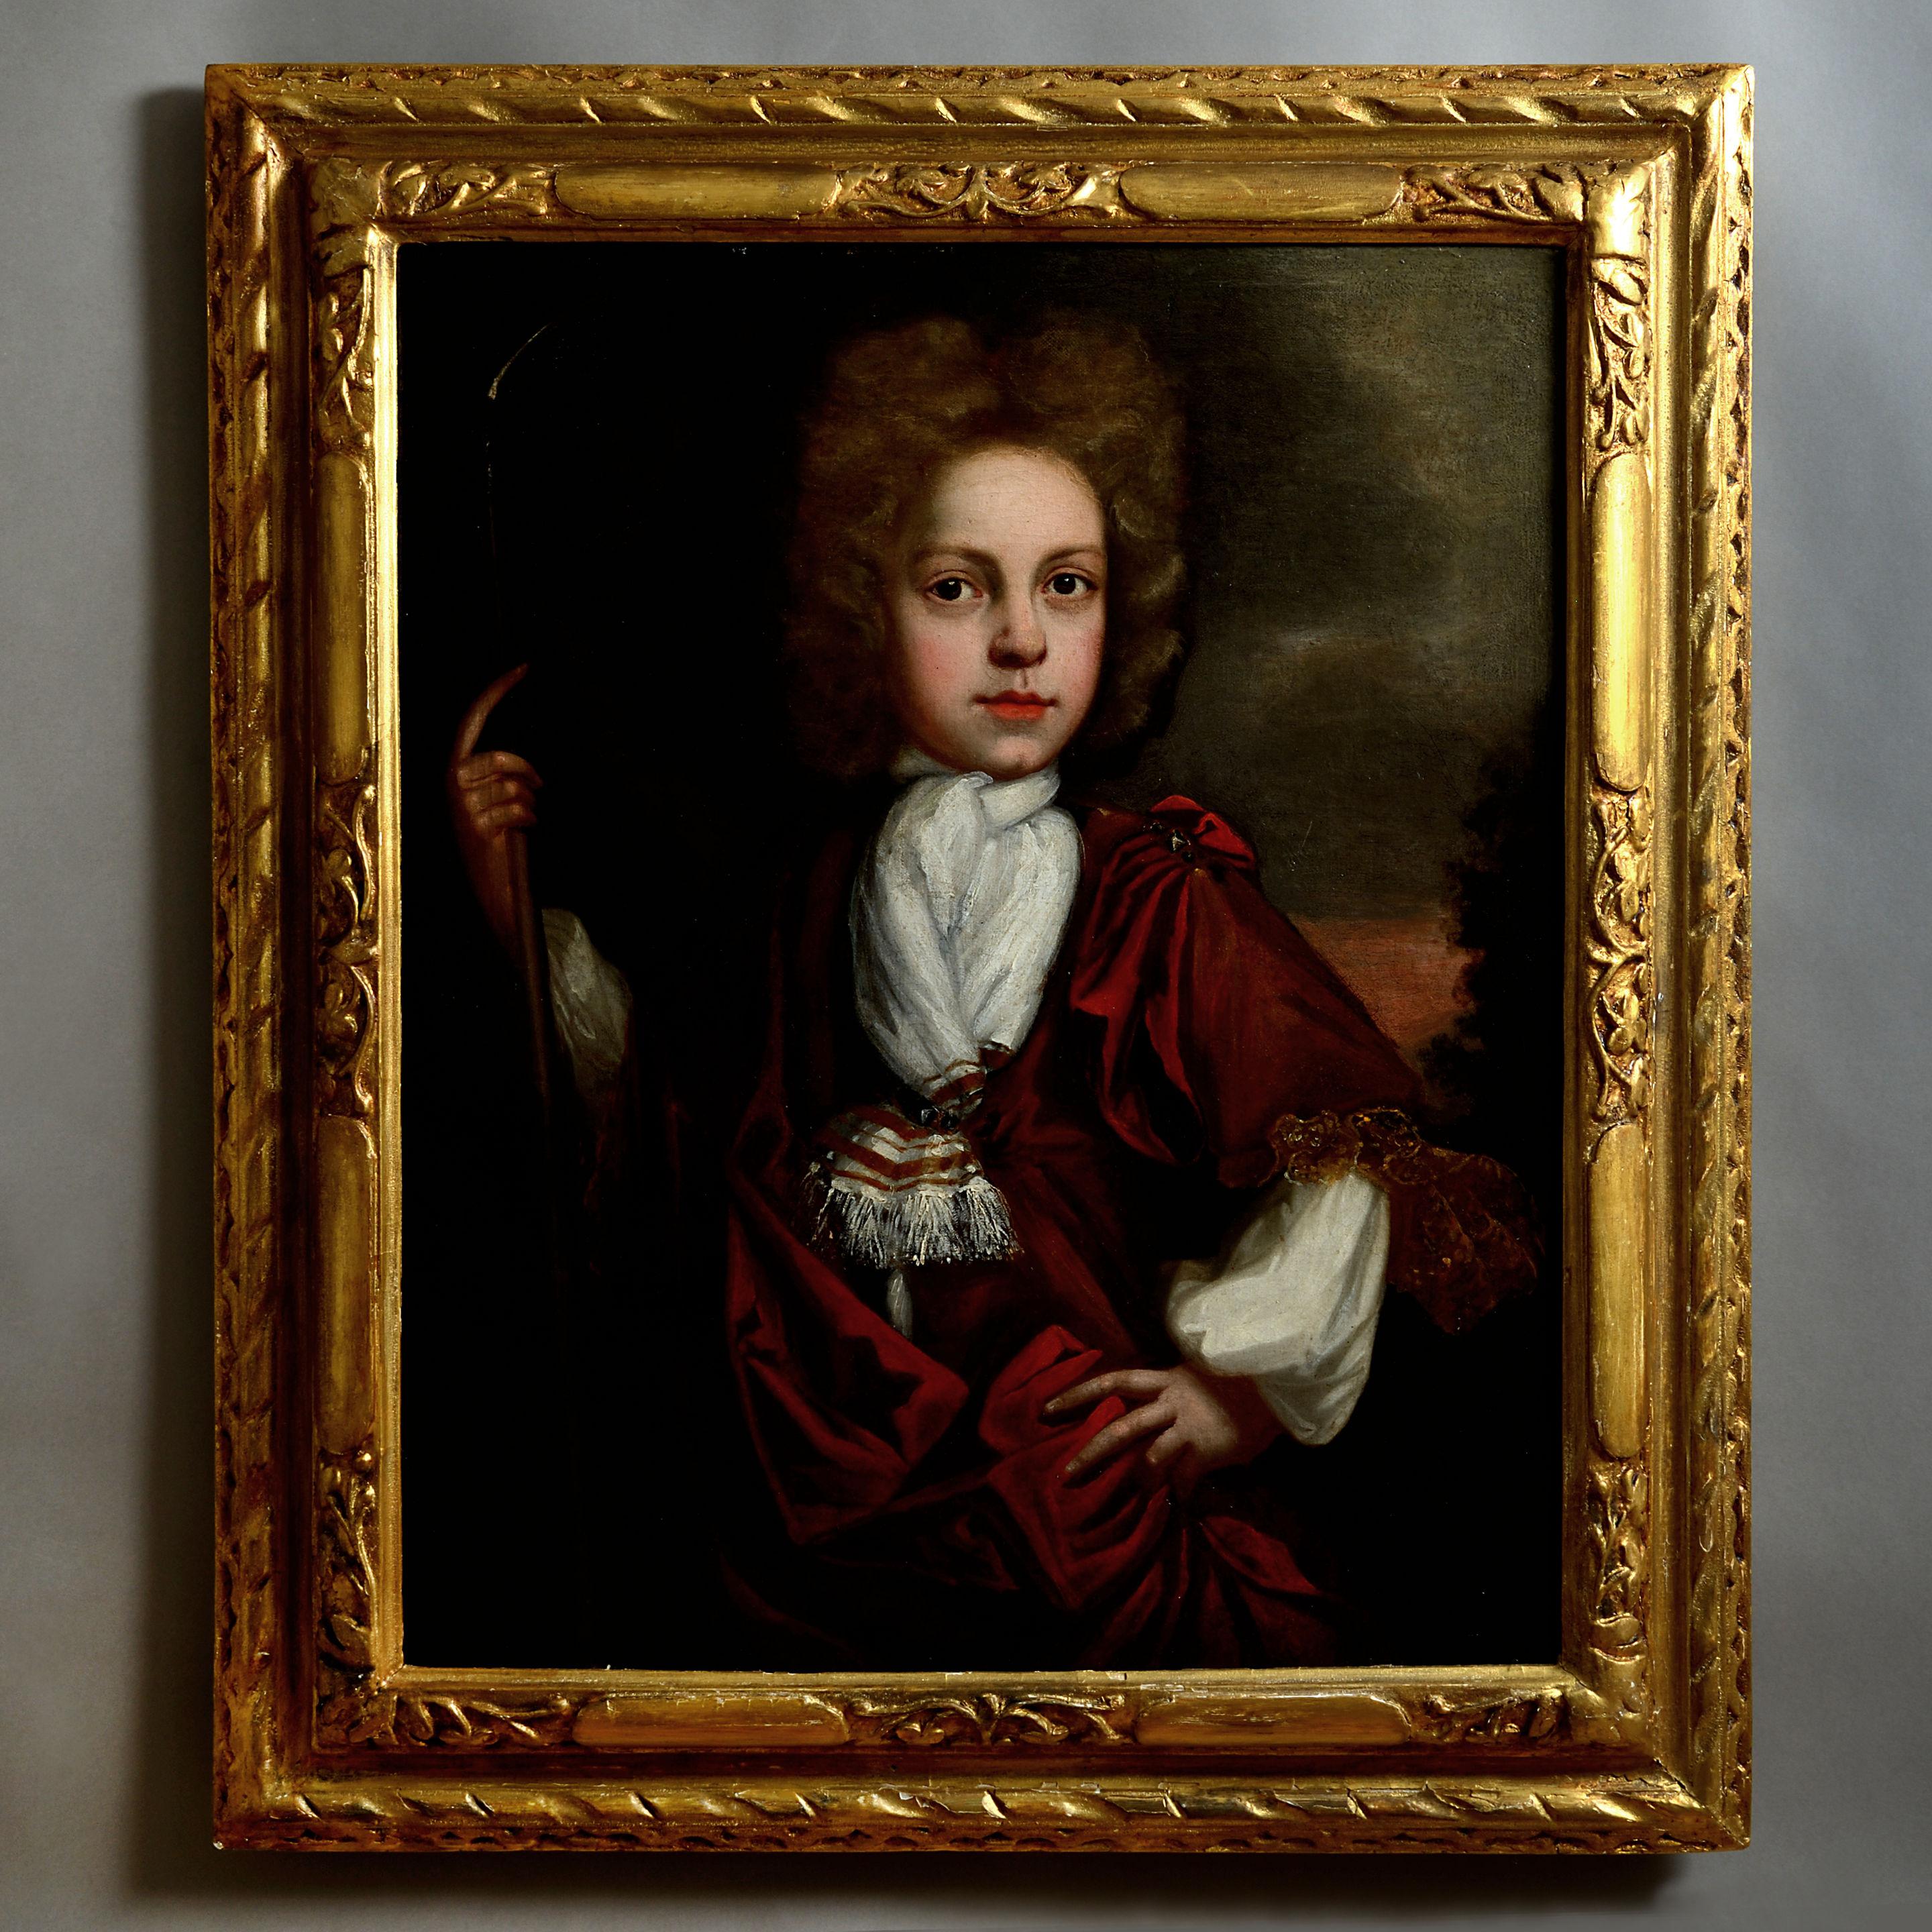 Unknown Portrait Painting – Early 18th Century Oil on Canvas Portrait of Samuel Bagshawe (1689-1712)